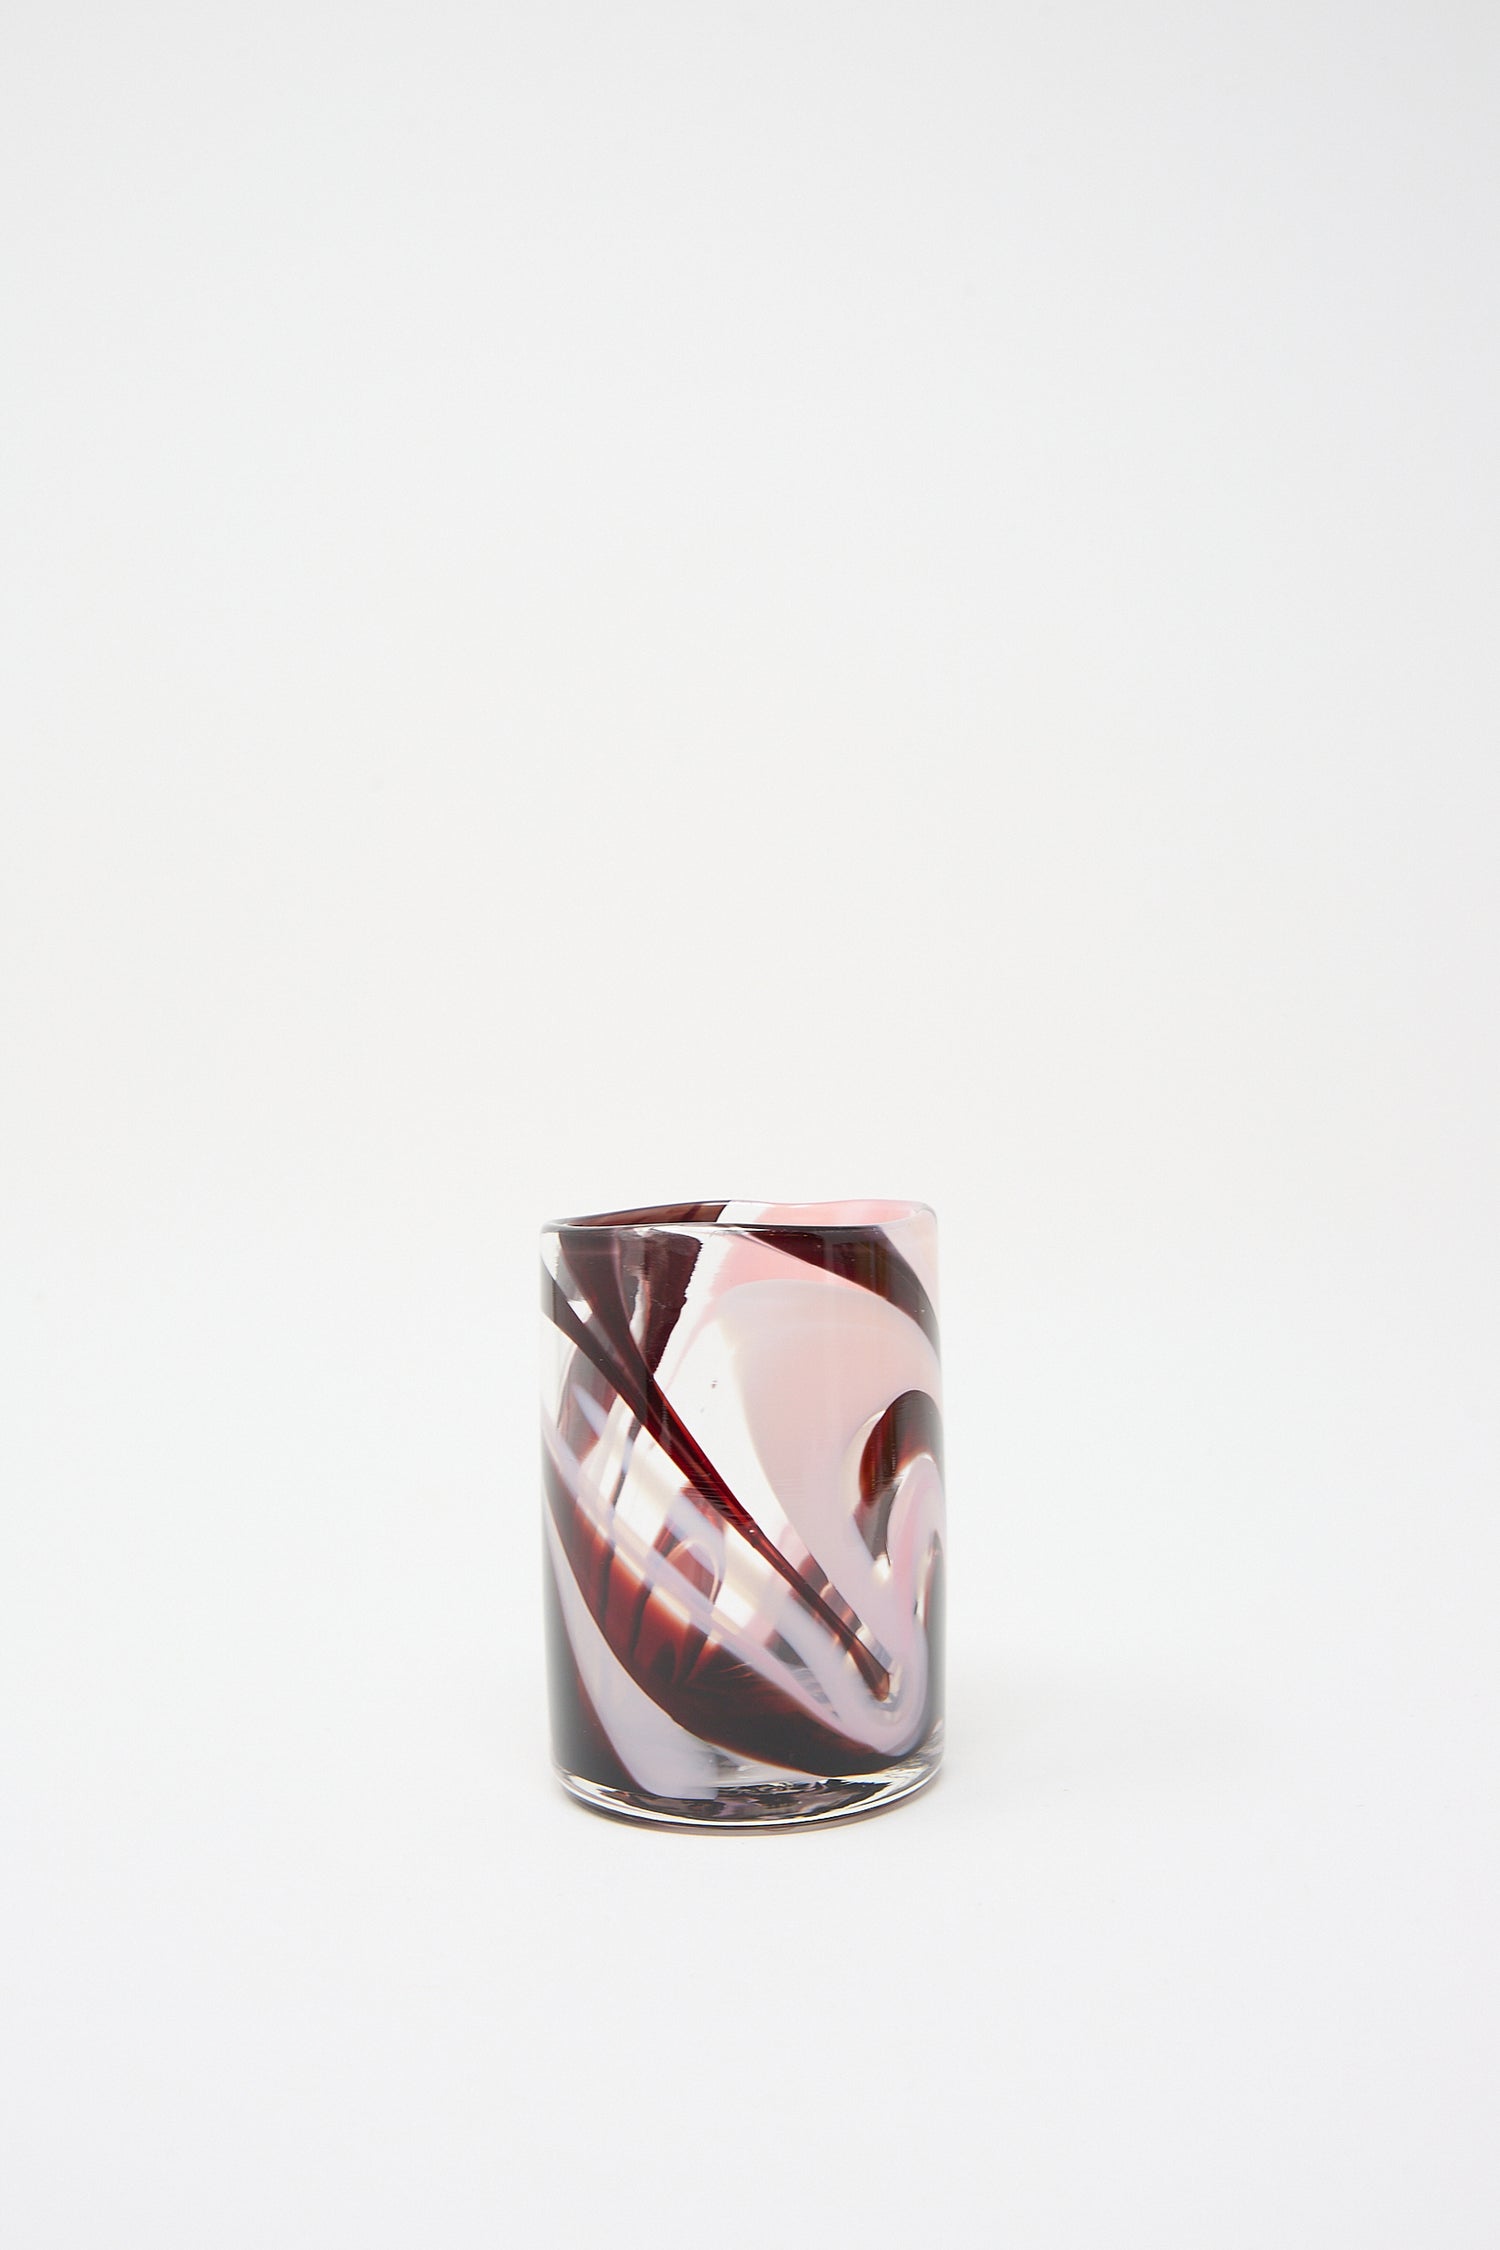 Clear hand blown glass with a swirl of pink and gray colors on a white background, crafted by artisans in NYC. - Upstate's Gamay Cup